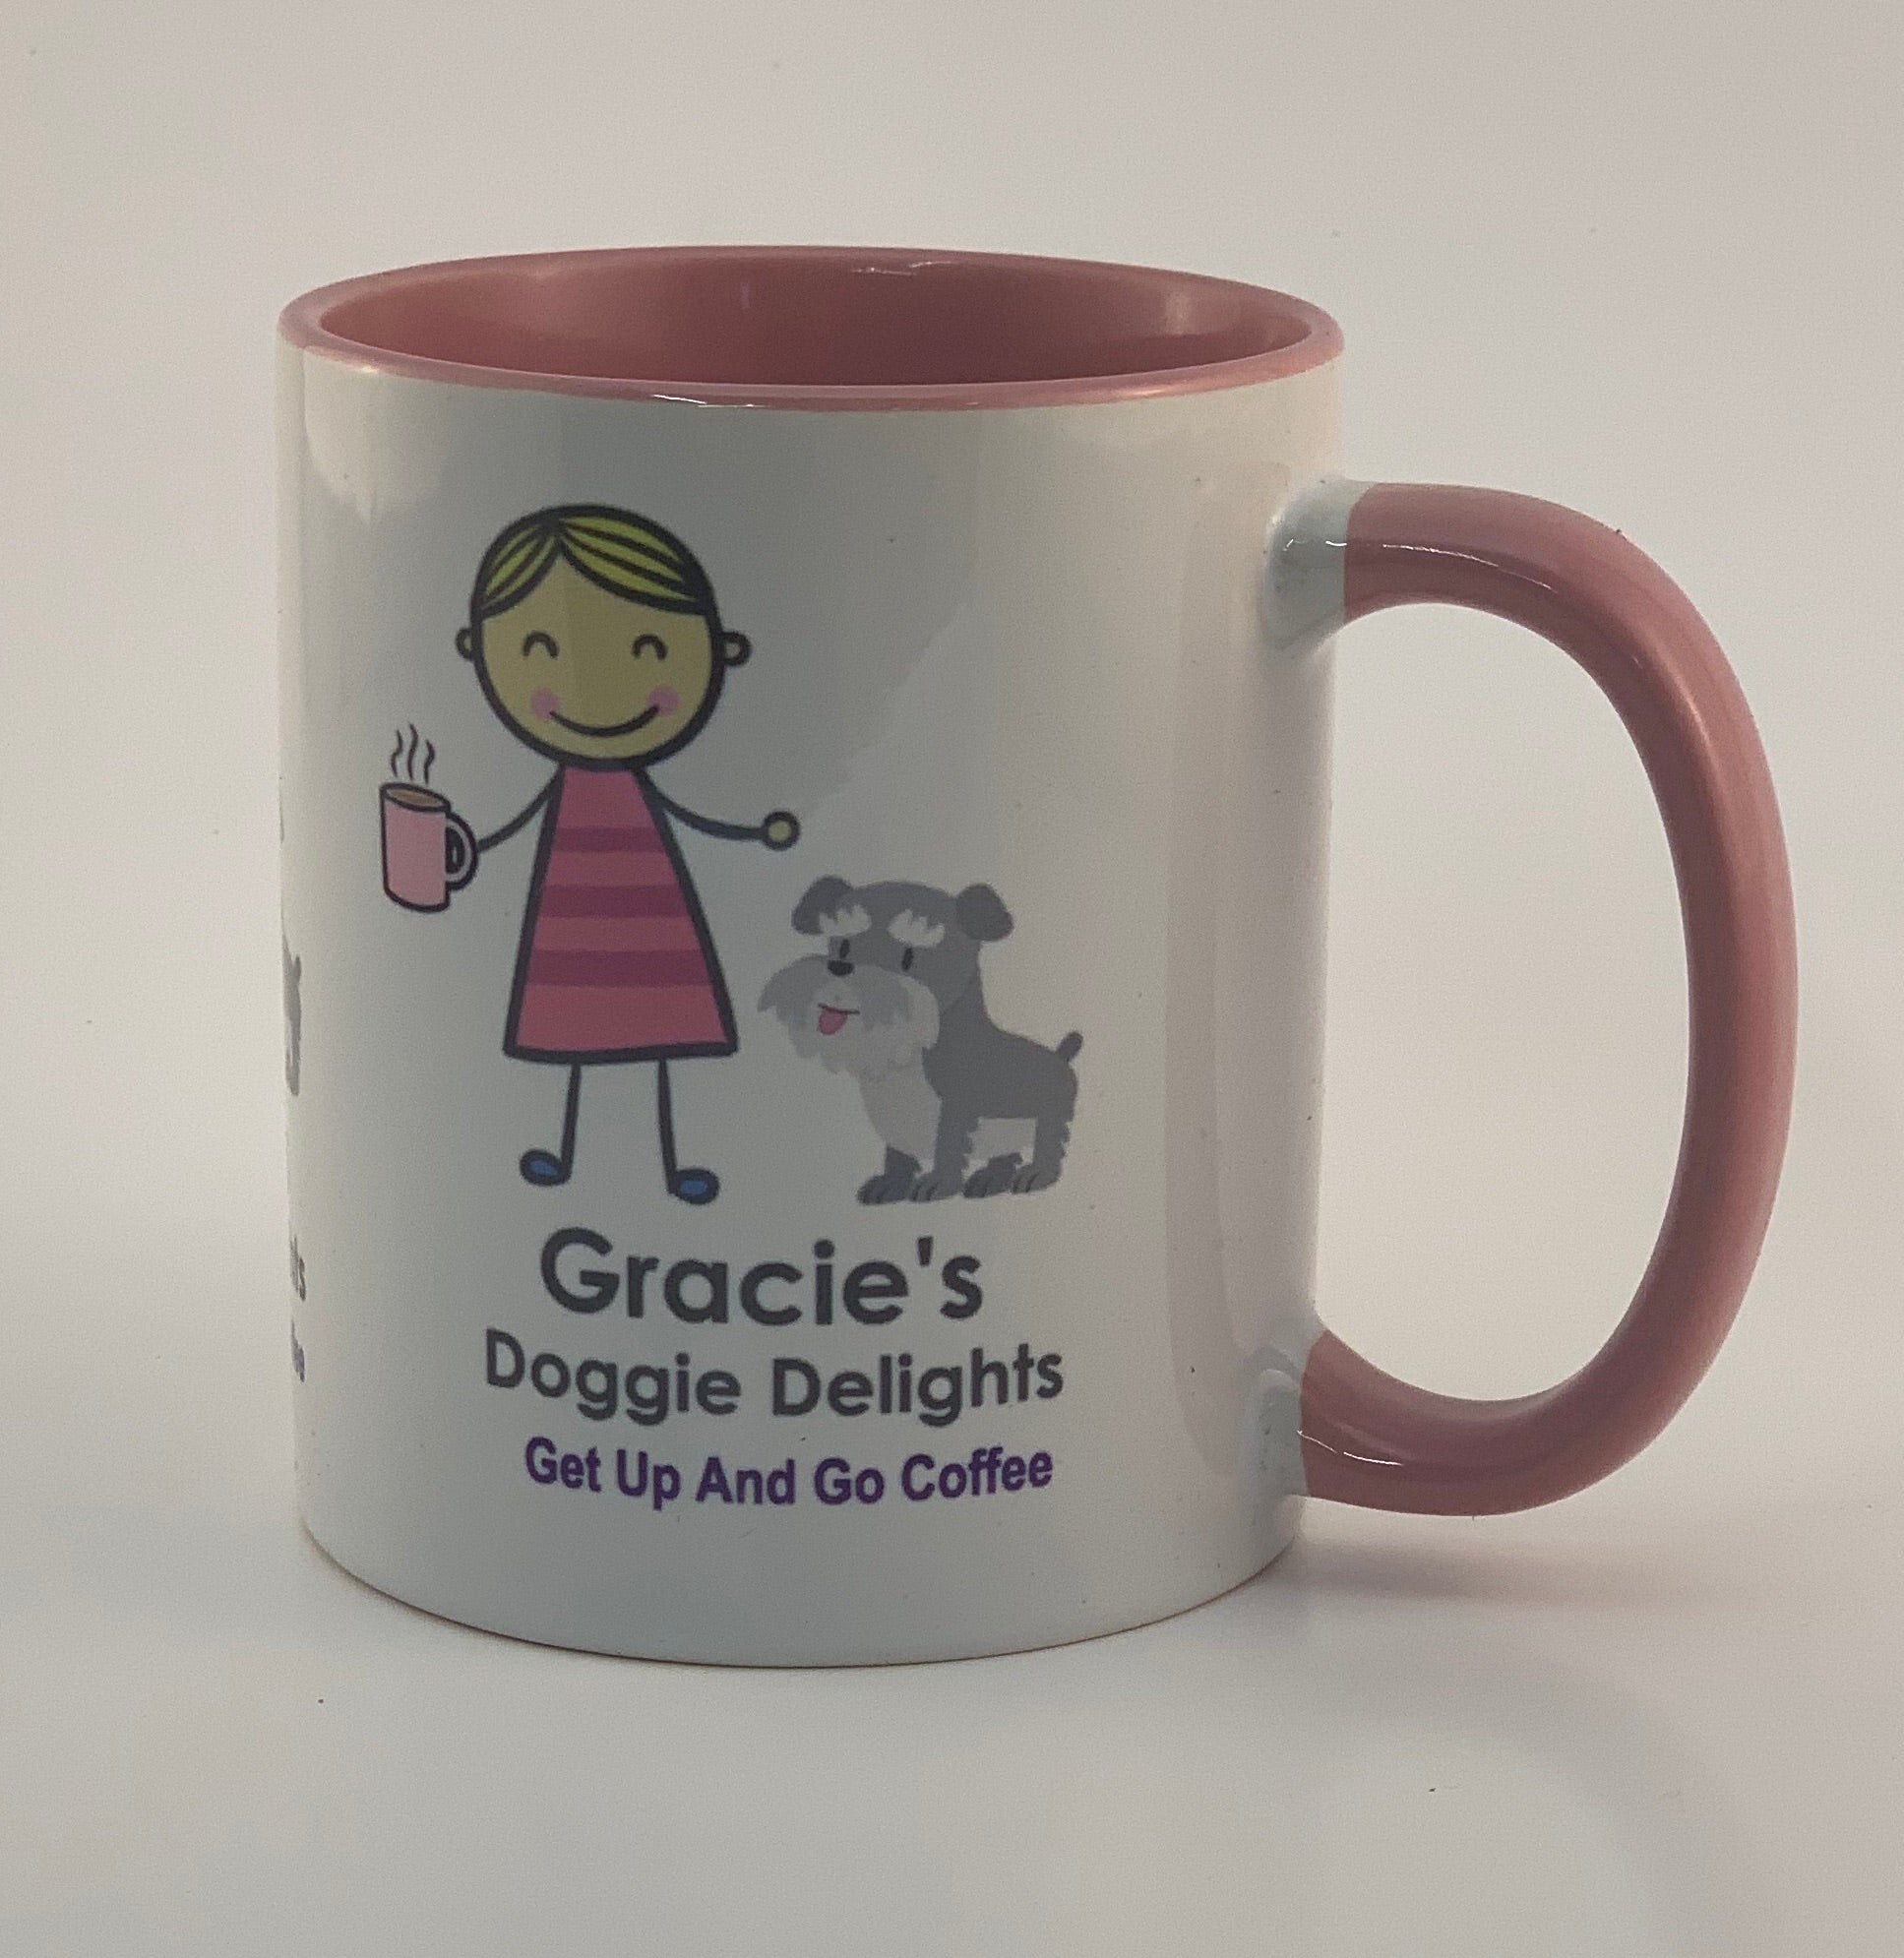 Gracie's Get Up And Go Coffee and Mugs – Gracie's Doggie Delights